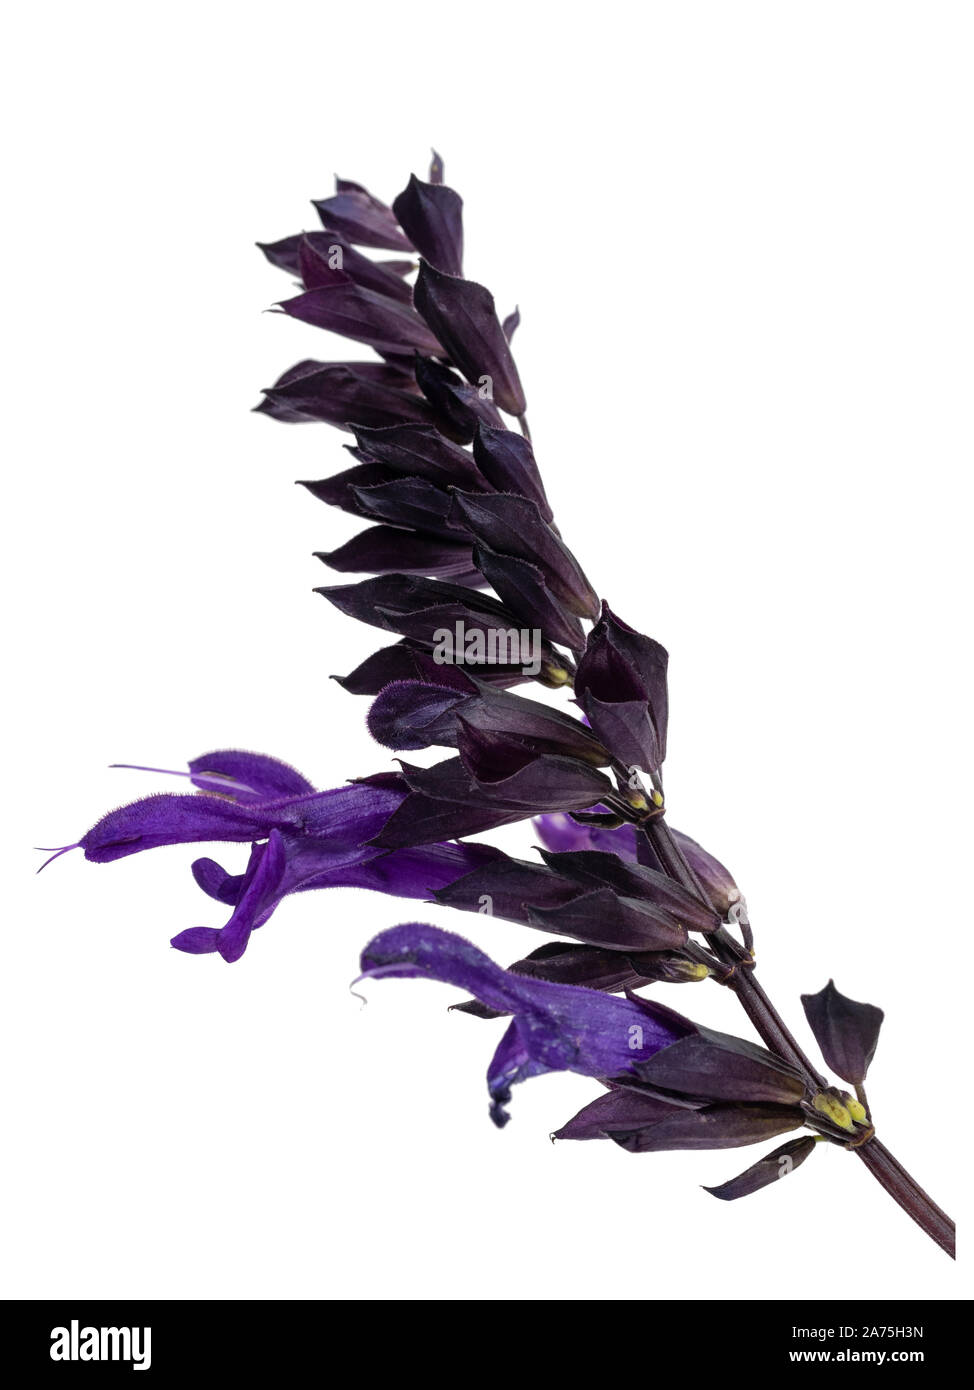 Single flower stem of the purple bloomed half hardy shrubby sage, Salvia 'Amistad' on a white background Stock Photo